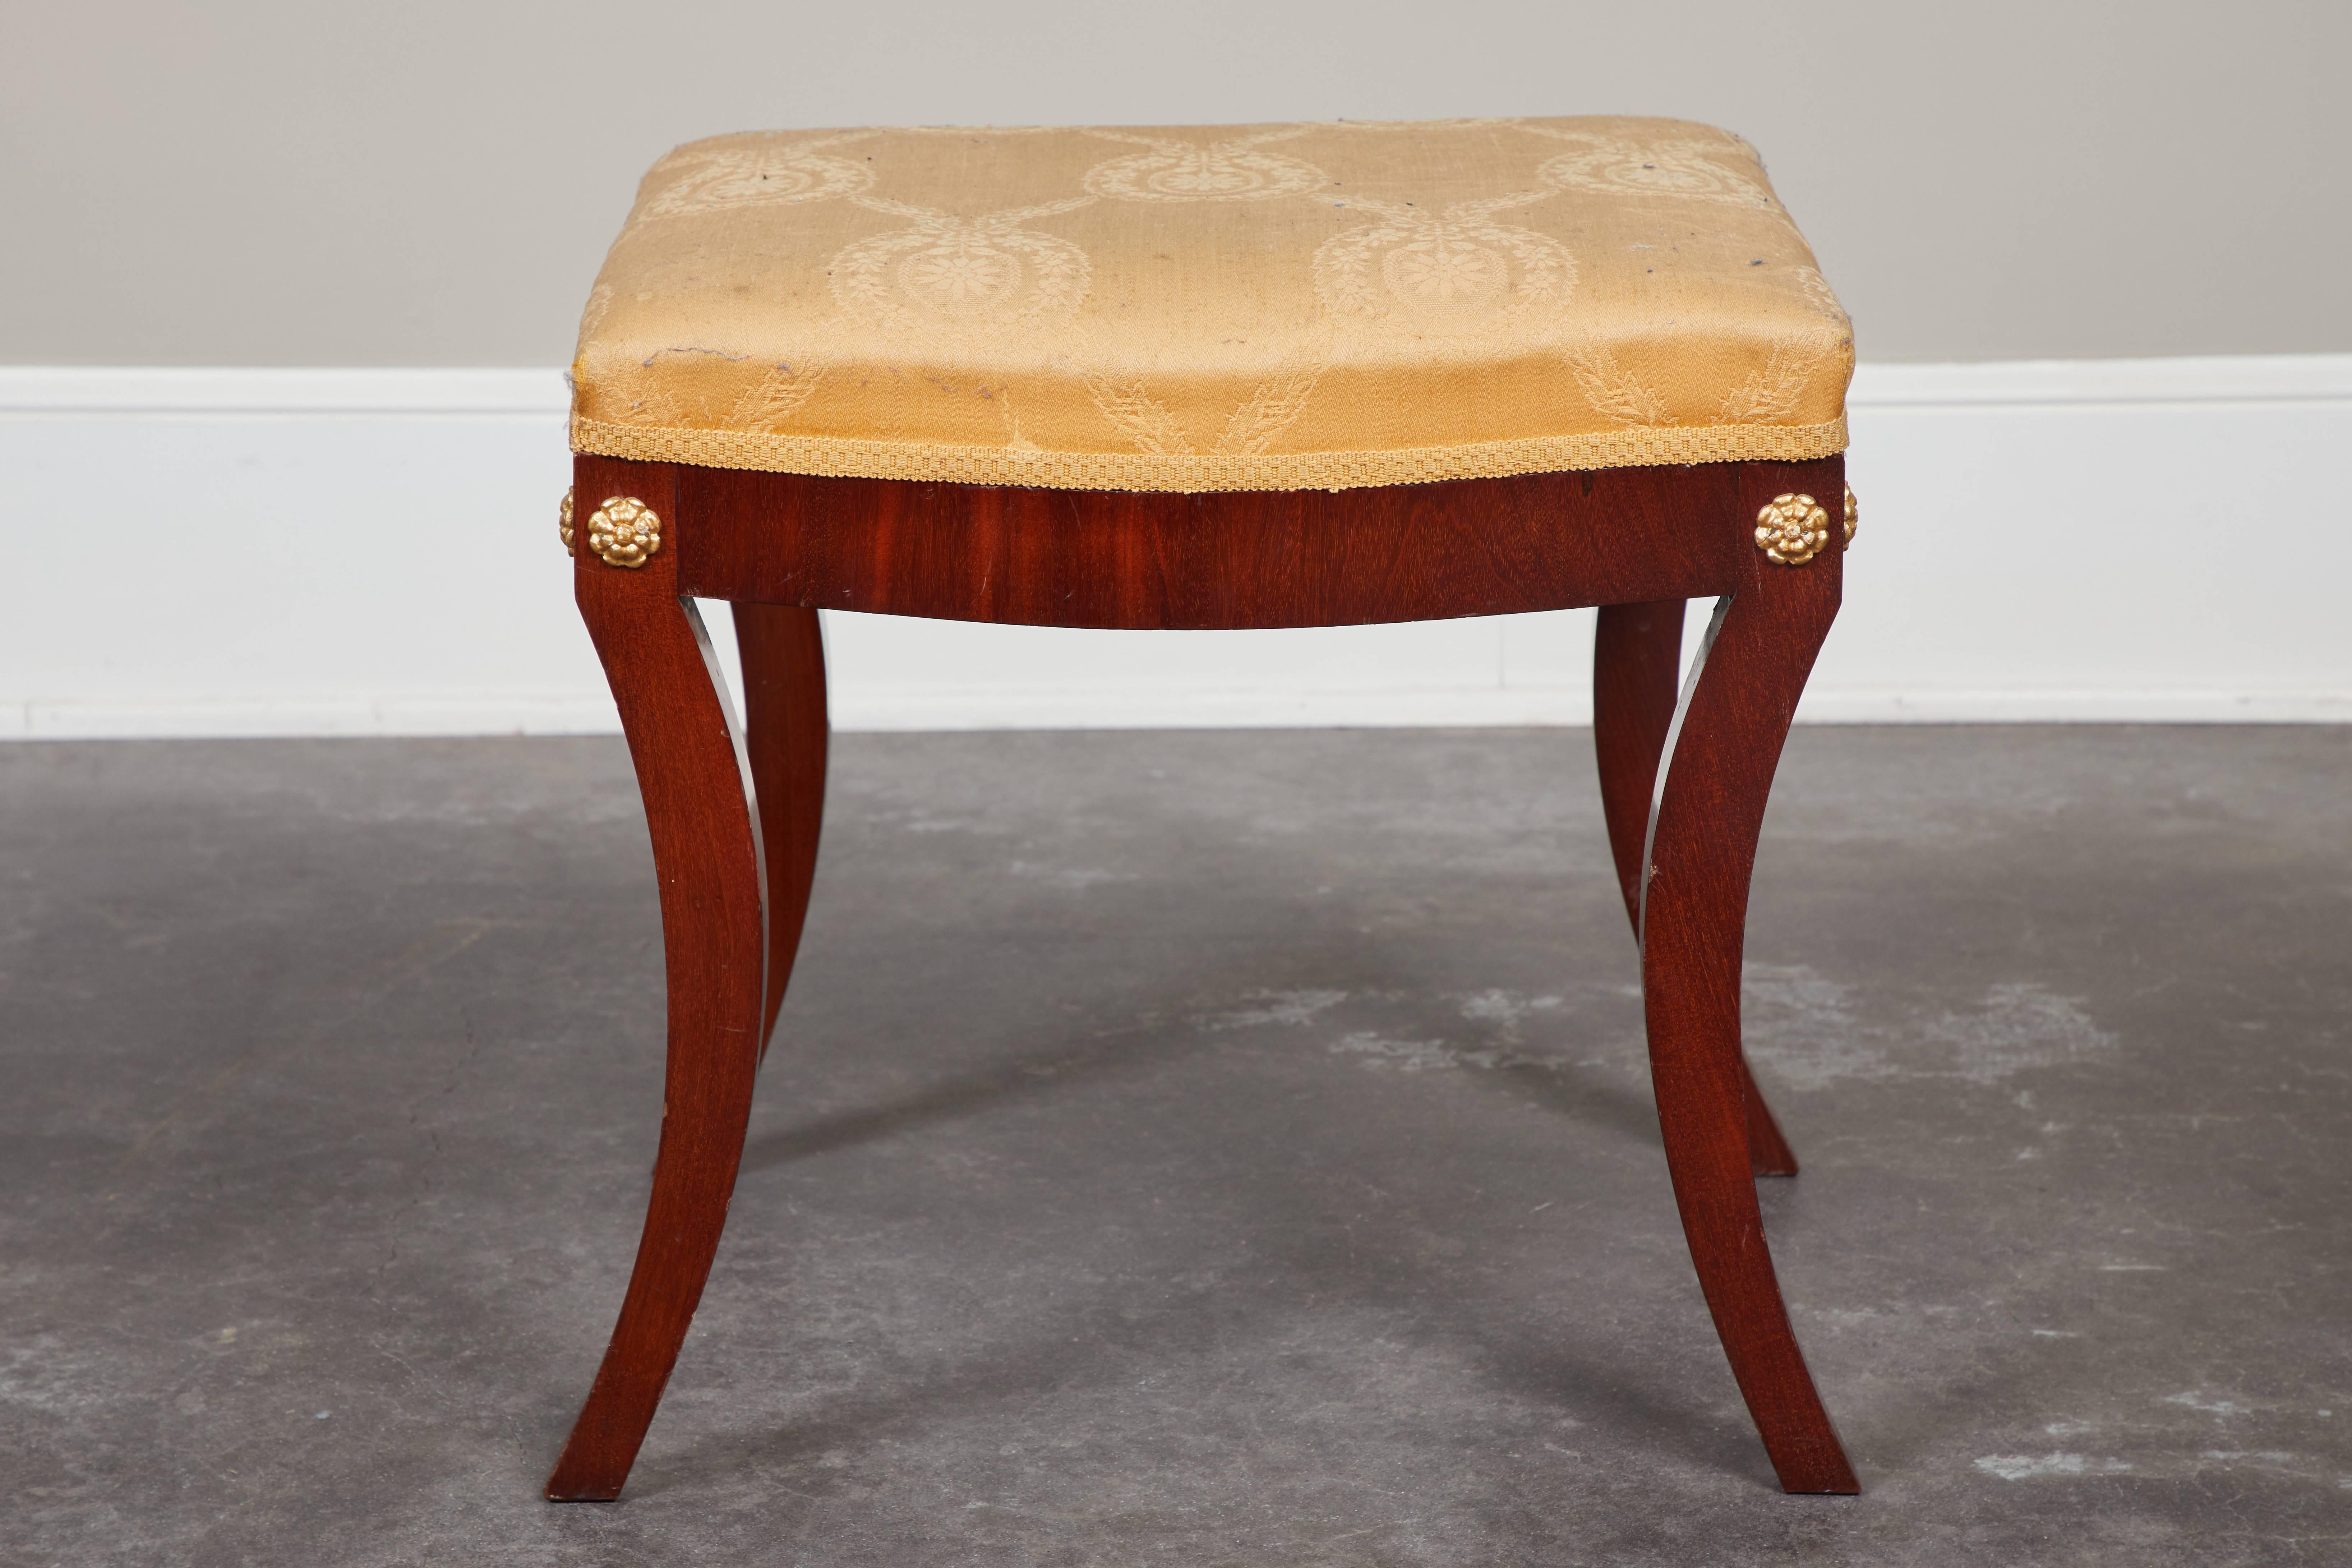 Pair of early 19th century Swedish empire mahogany stools with bowed legs and brass fittings at corners.